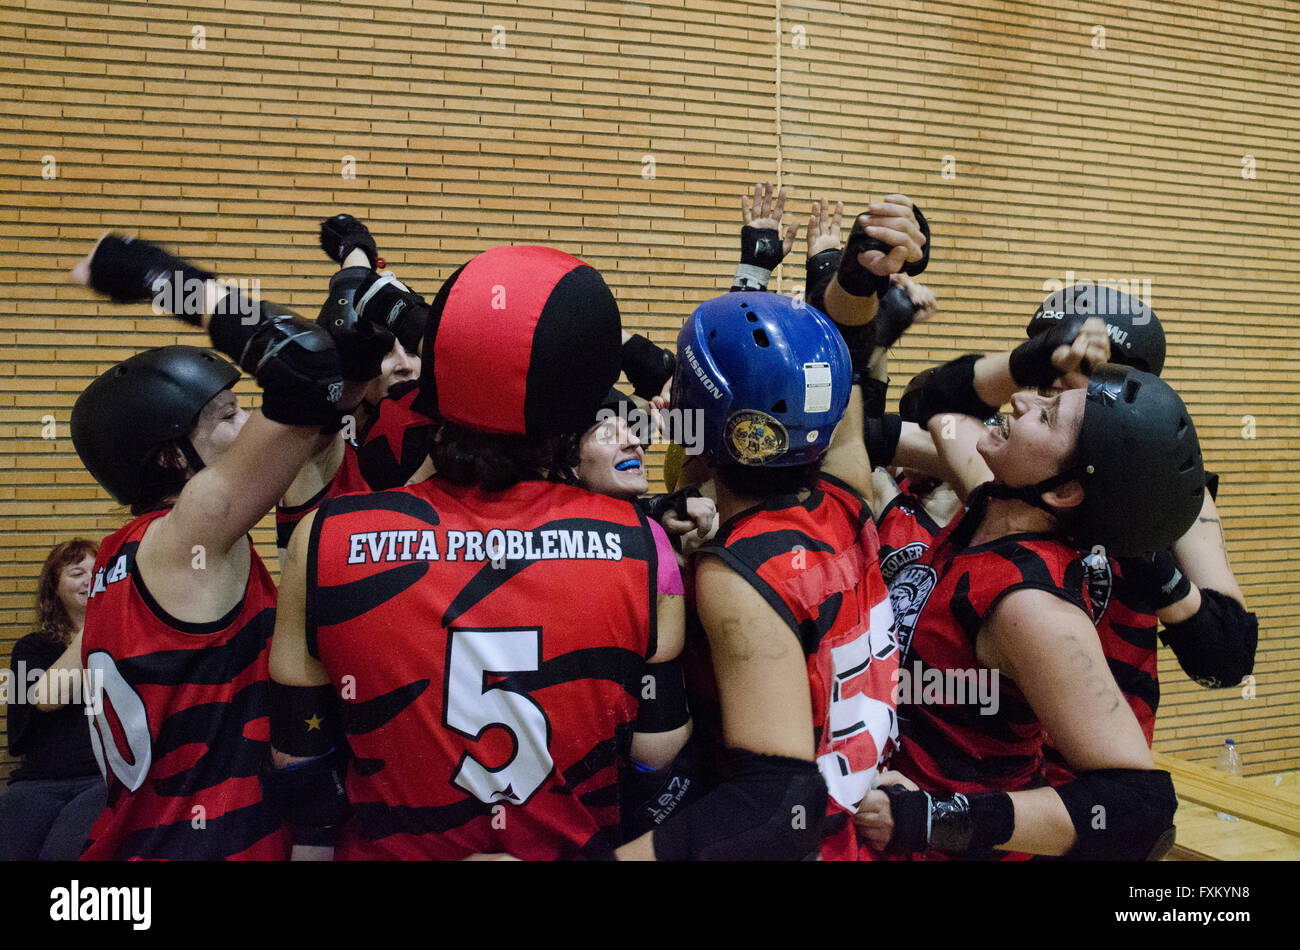 Madrid, Spain. 16th April, 2016. Players of Roller Derby Madrid A celebrating their victory over Croydon Roller Derby Vice Squad. Credit:  Valentin Sama-Rojo/Alamy Live News. Stock Photo